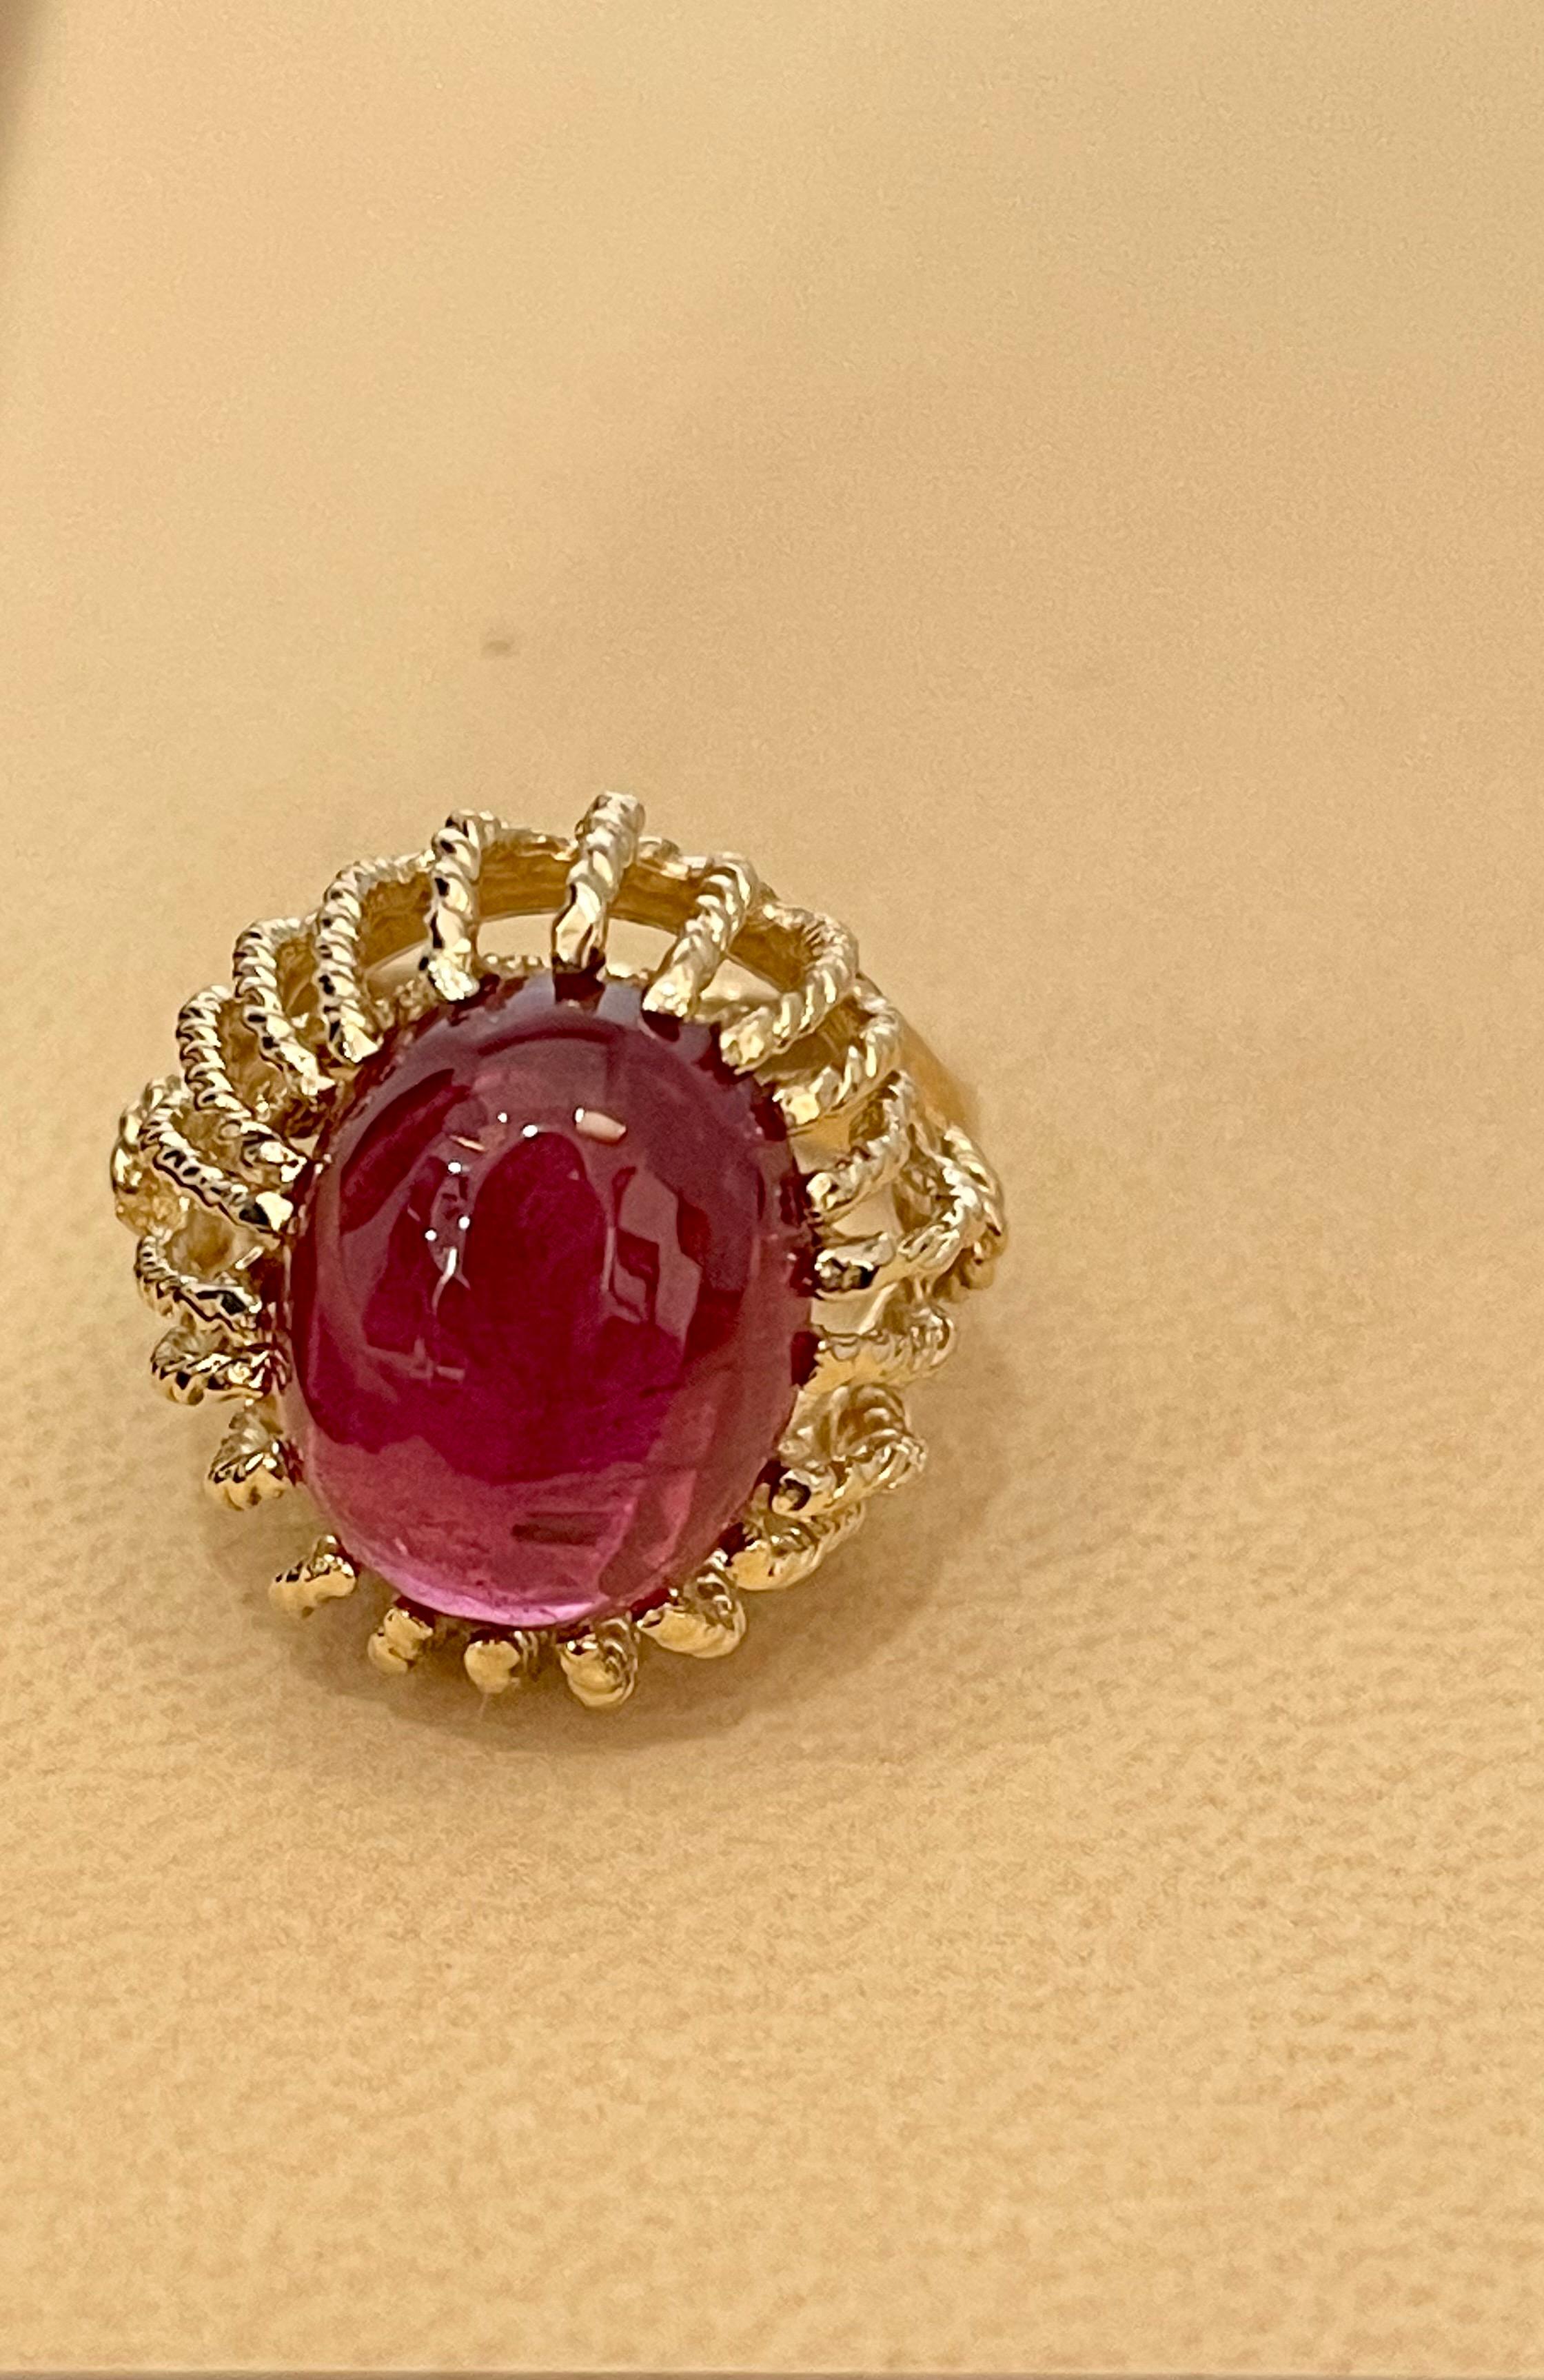 Approximately 7 Carat Oval Cut  Cabochon Pink Tourmaline 14 Karat Yellow Gold Ring Size 7
7 Carat of Pink Tourmaline oval shape  surrounded by nice gold design.
Gold: 14 Karat Yellow  gold , Beautiful design
Weight: 12 gram Including stone

Ring